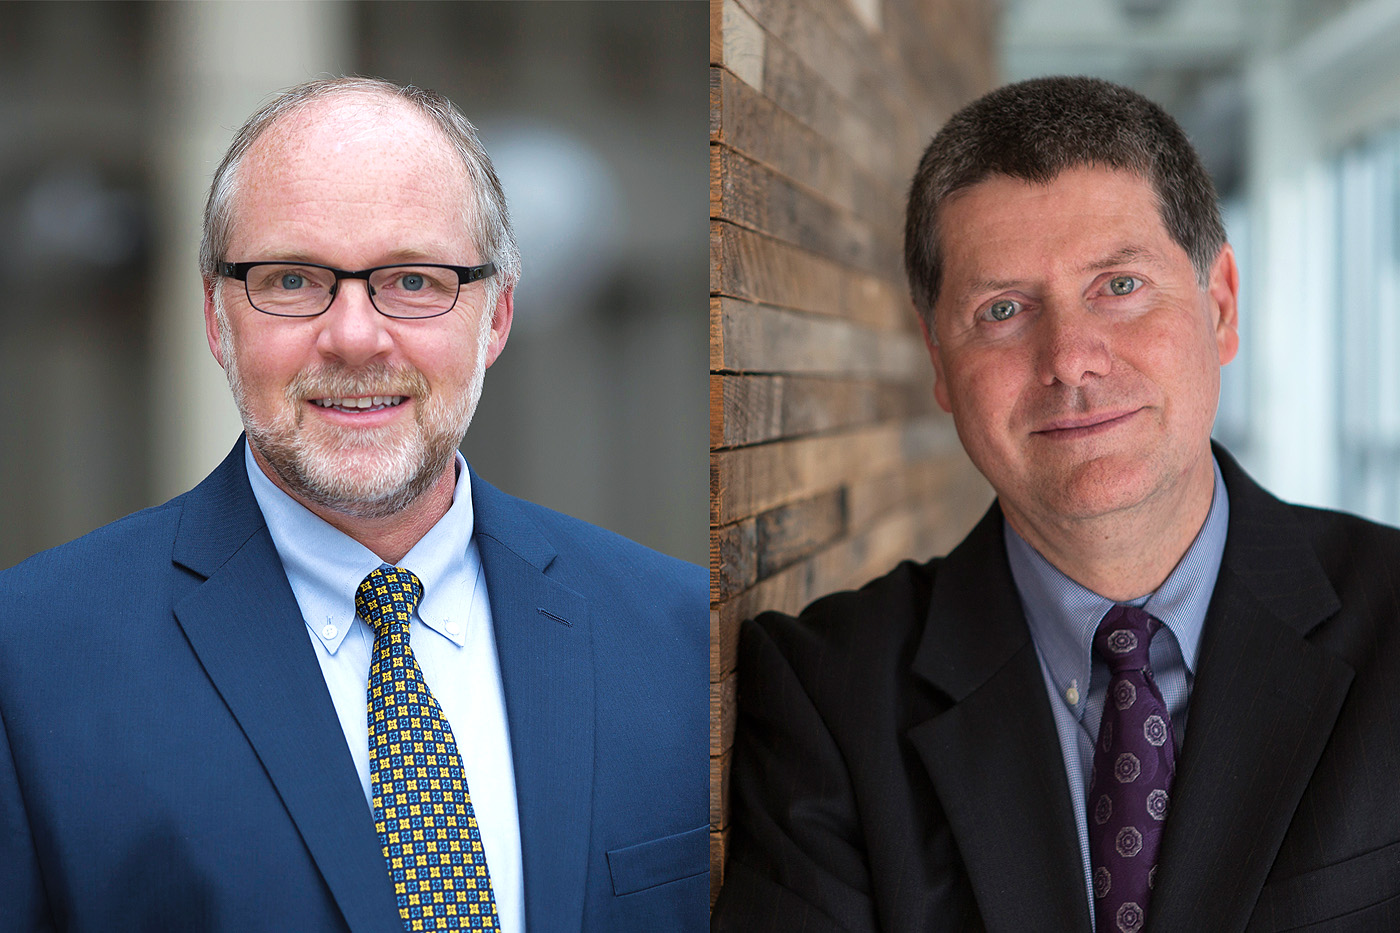 As Northeastern’s regional campus network expands, two new deans named